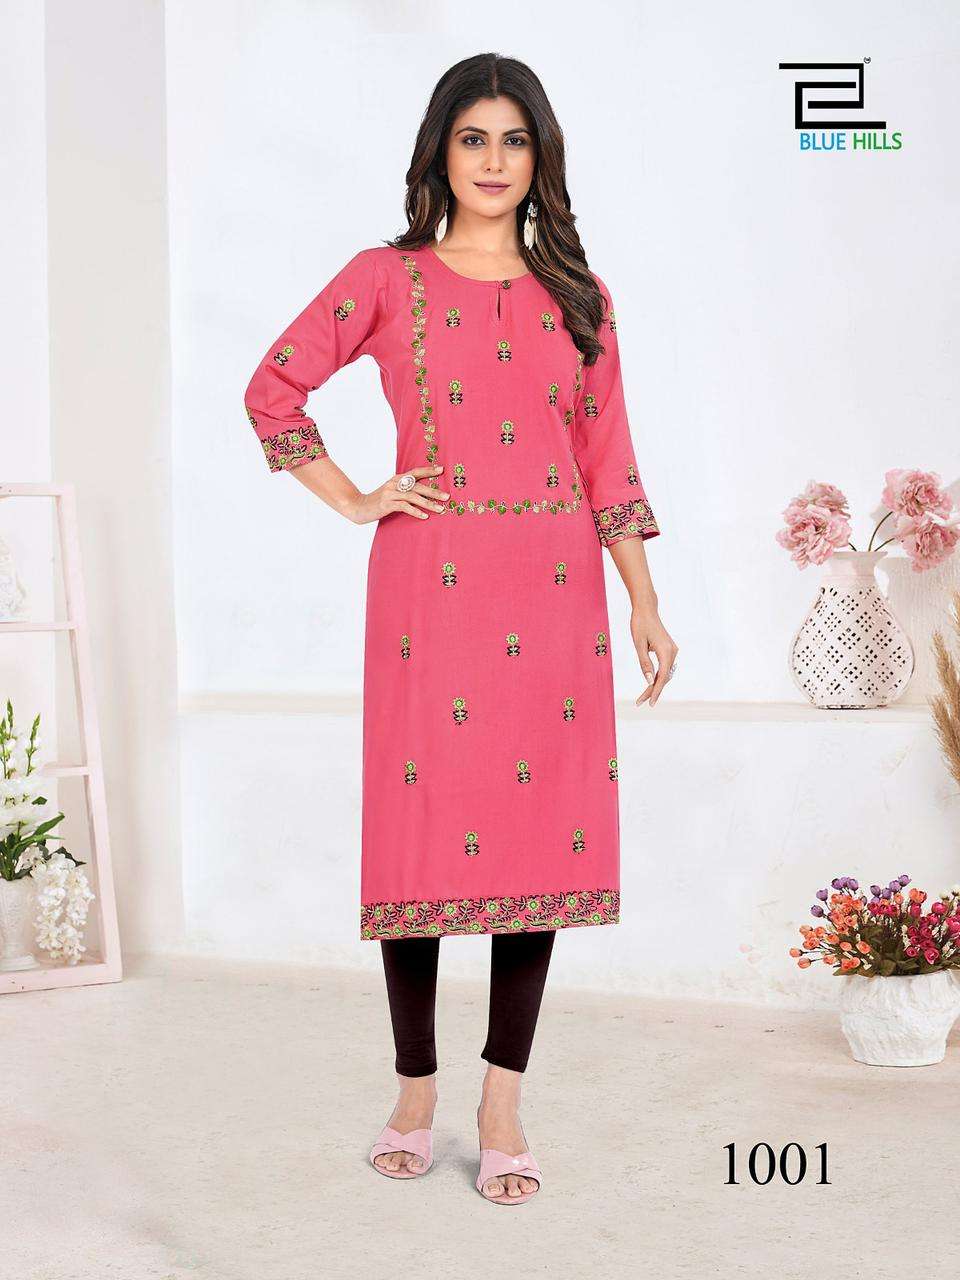 SITA RAMAN RAYON 14 KG EMBROIDERY WORK STRAIGHT KURTI BY BLUE HILLS BRAND WHOLESALER AND DEALER